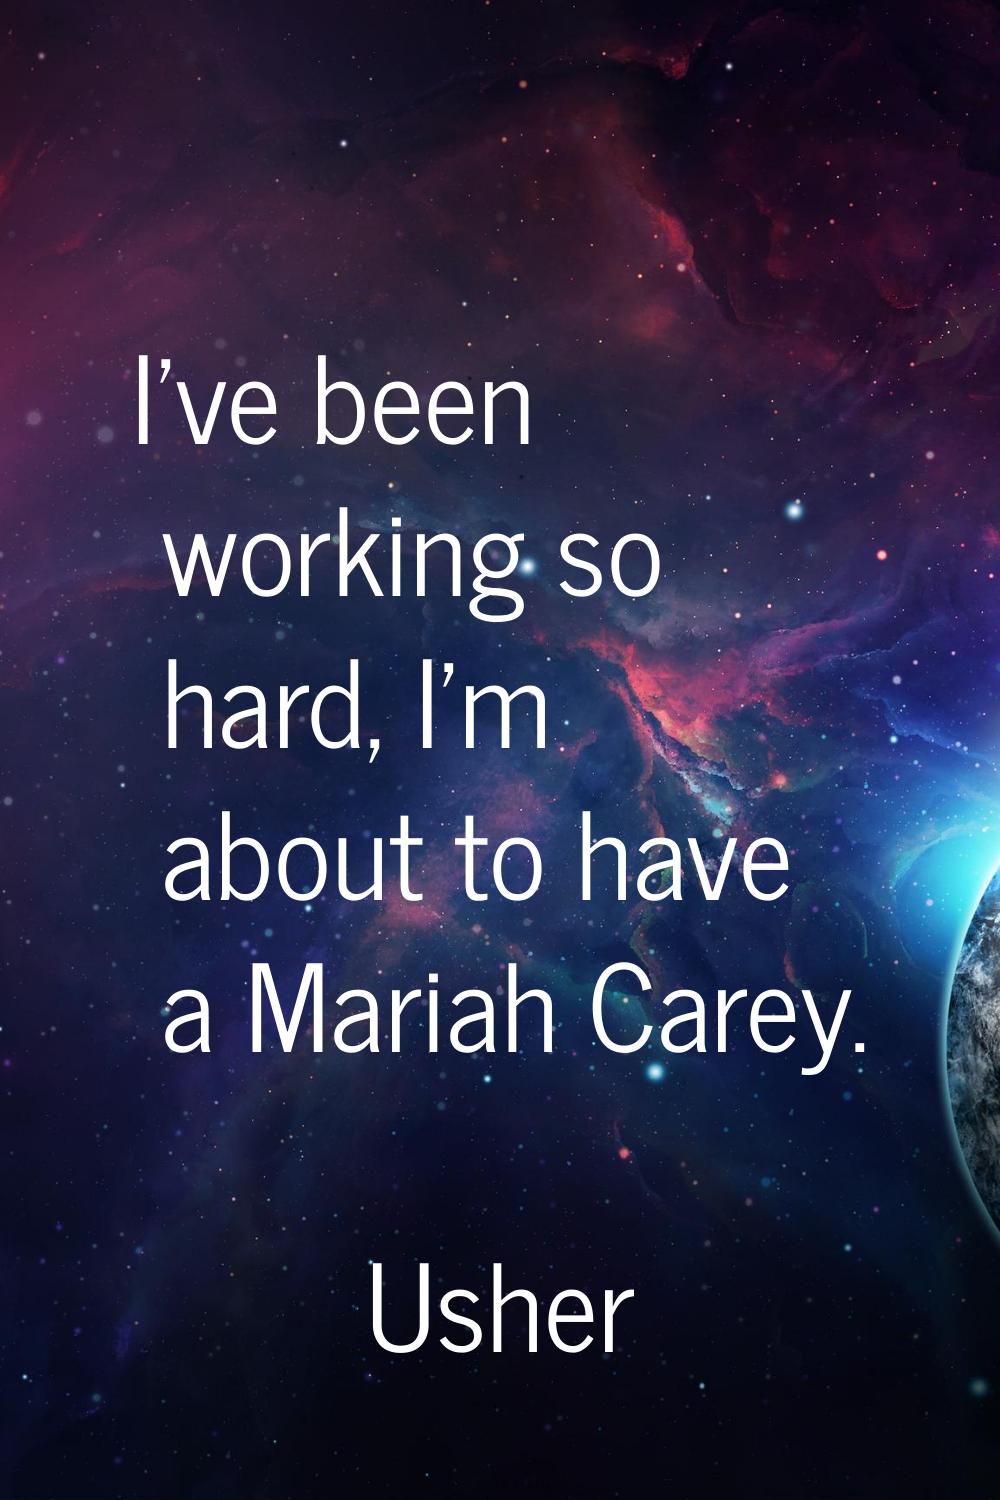 I've been working so hard, I'm about to have a Mariah Carey.